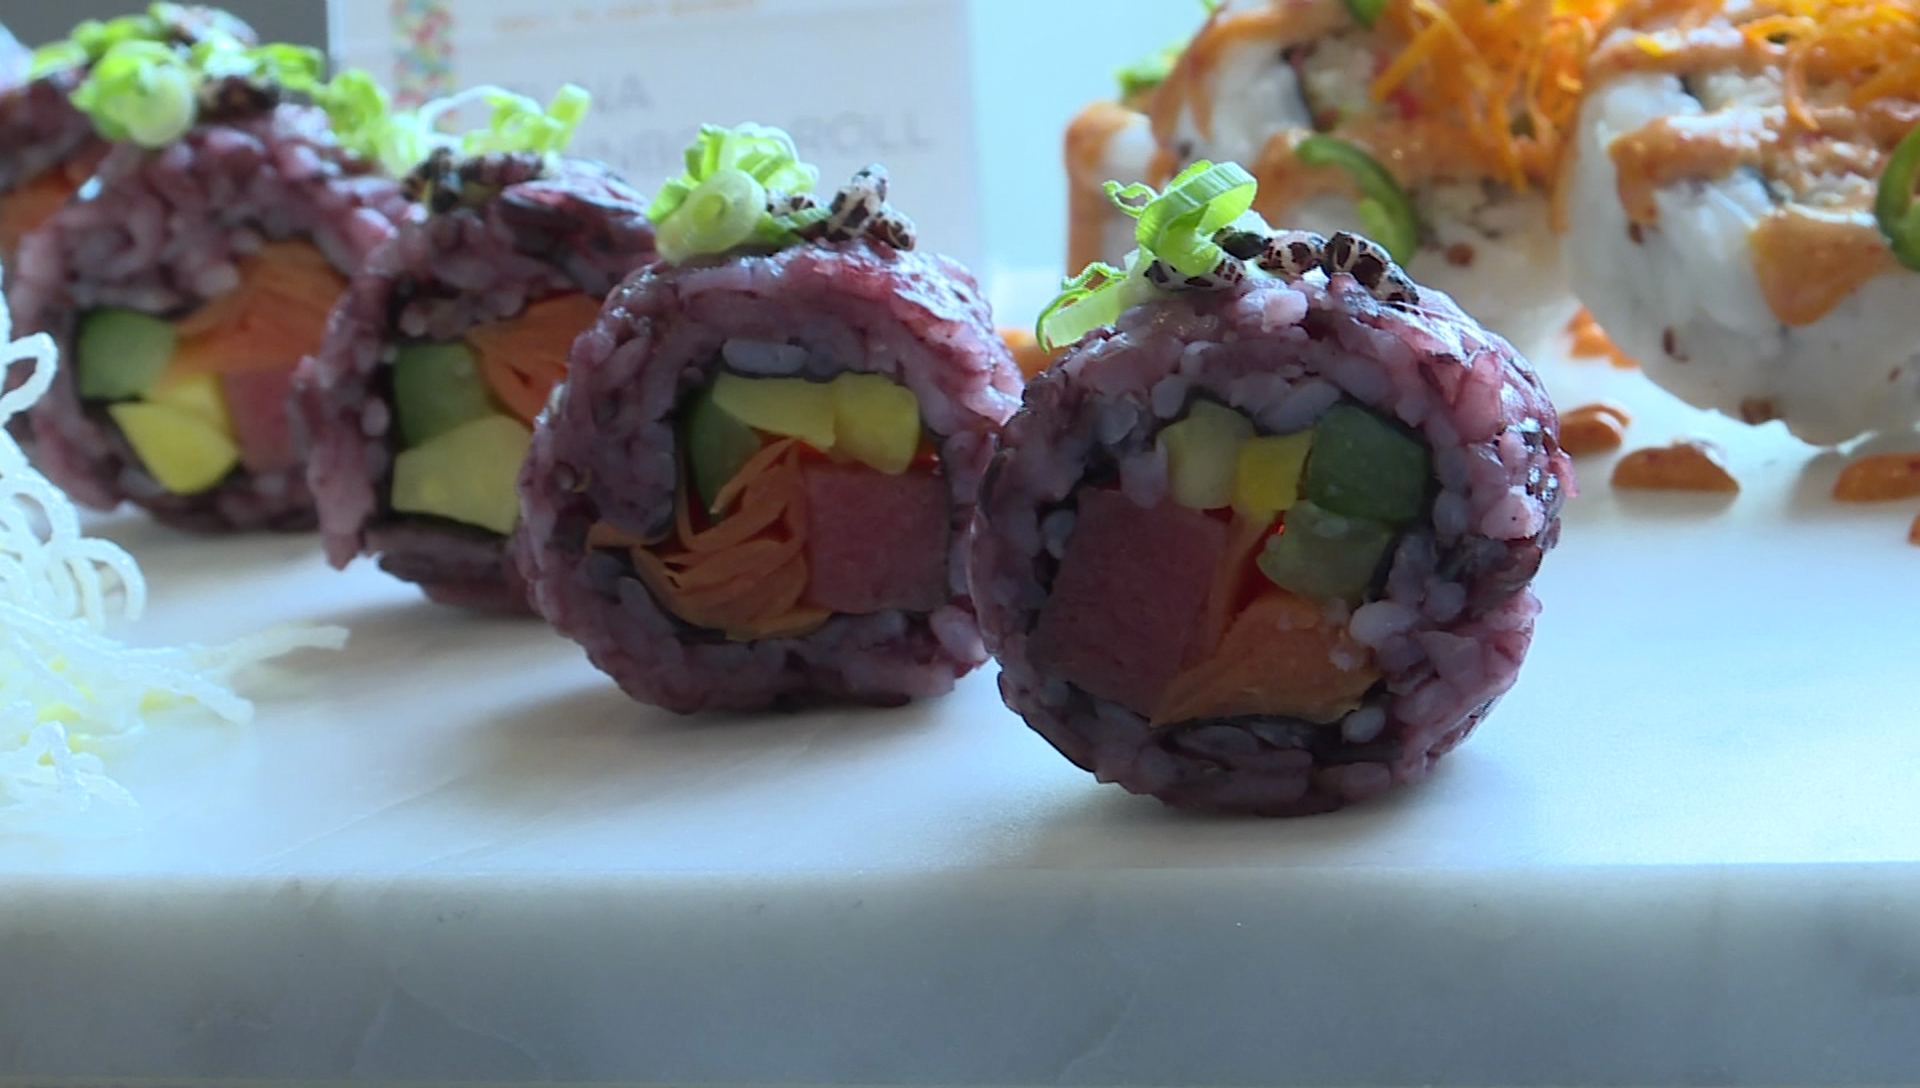 An assortment of plant-based sushi that was made by a Vancouver-based company